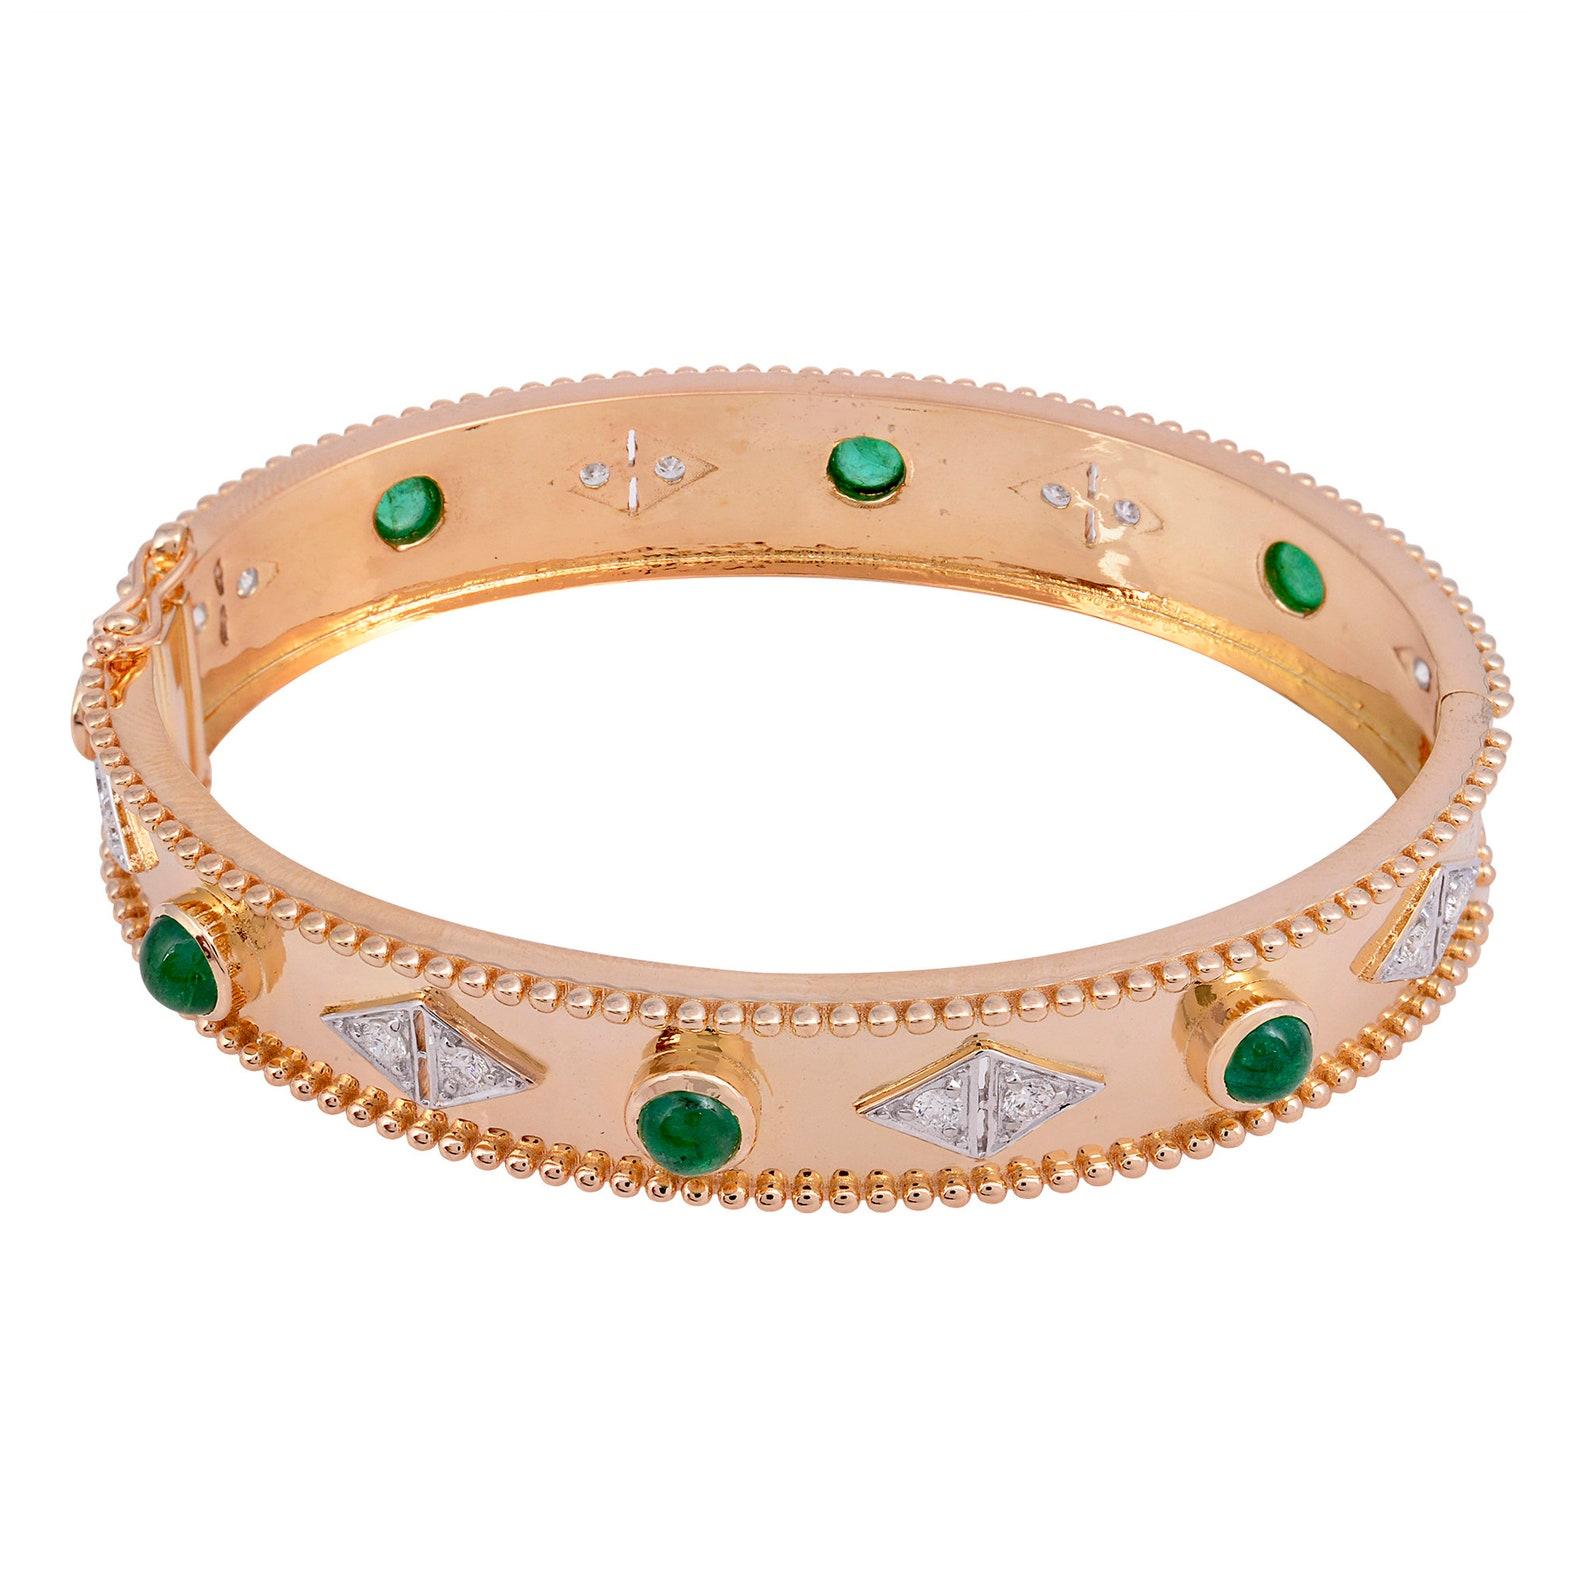 A stunning bracelet handmade in 14K gold.  It is set in 3.35 carats emerald and .80 carats of sparkling diamonds.  Clasp Closure.

FOLLOW  MEGHNA JEWELS storefront to view the latest collection & exclusive pieces.  Meghna Jewels is proudly rated as